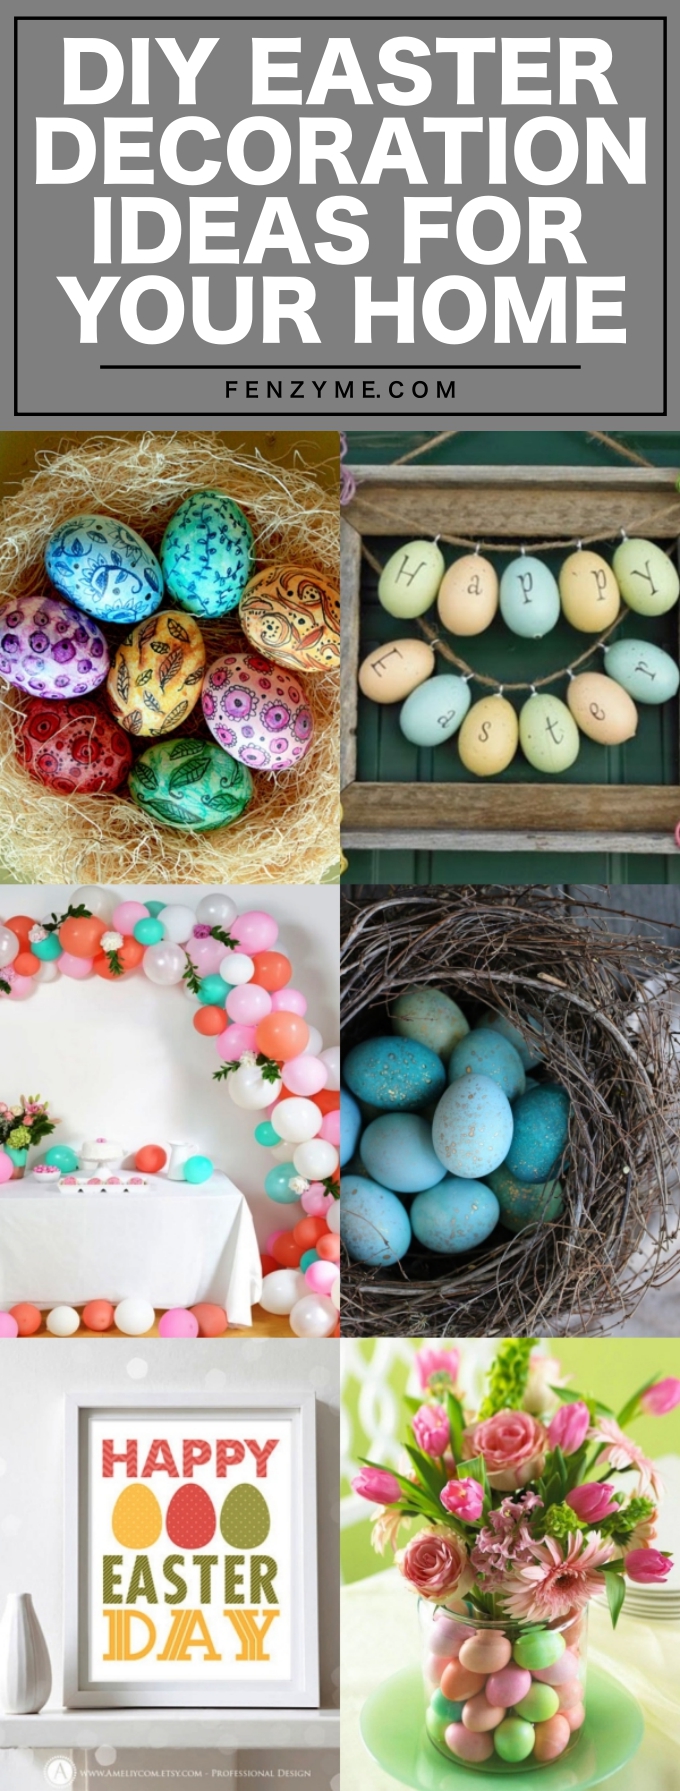 DIY EASTER DECORATION IDEAS FOR YOUR HOME